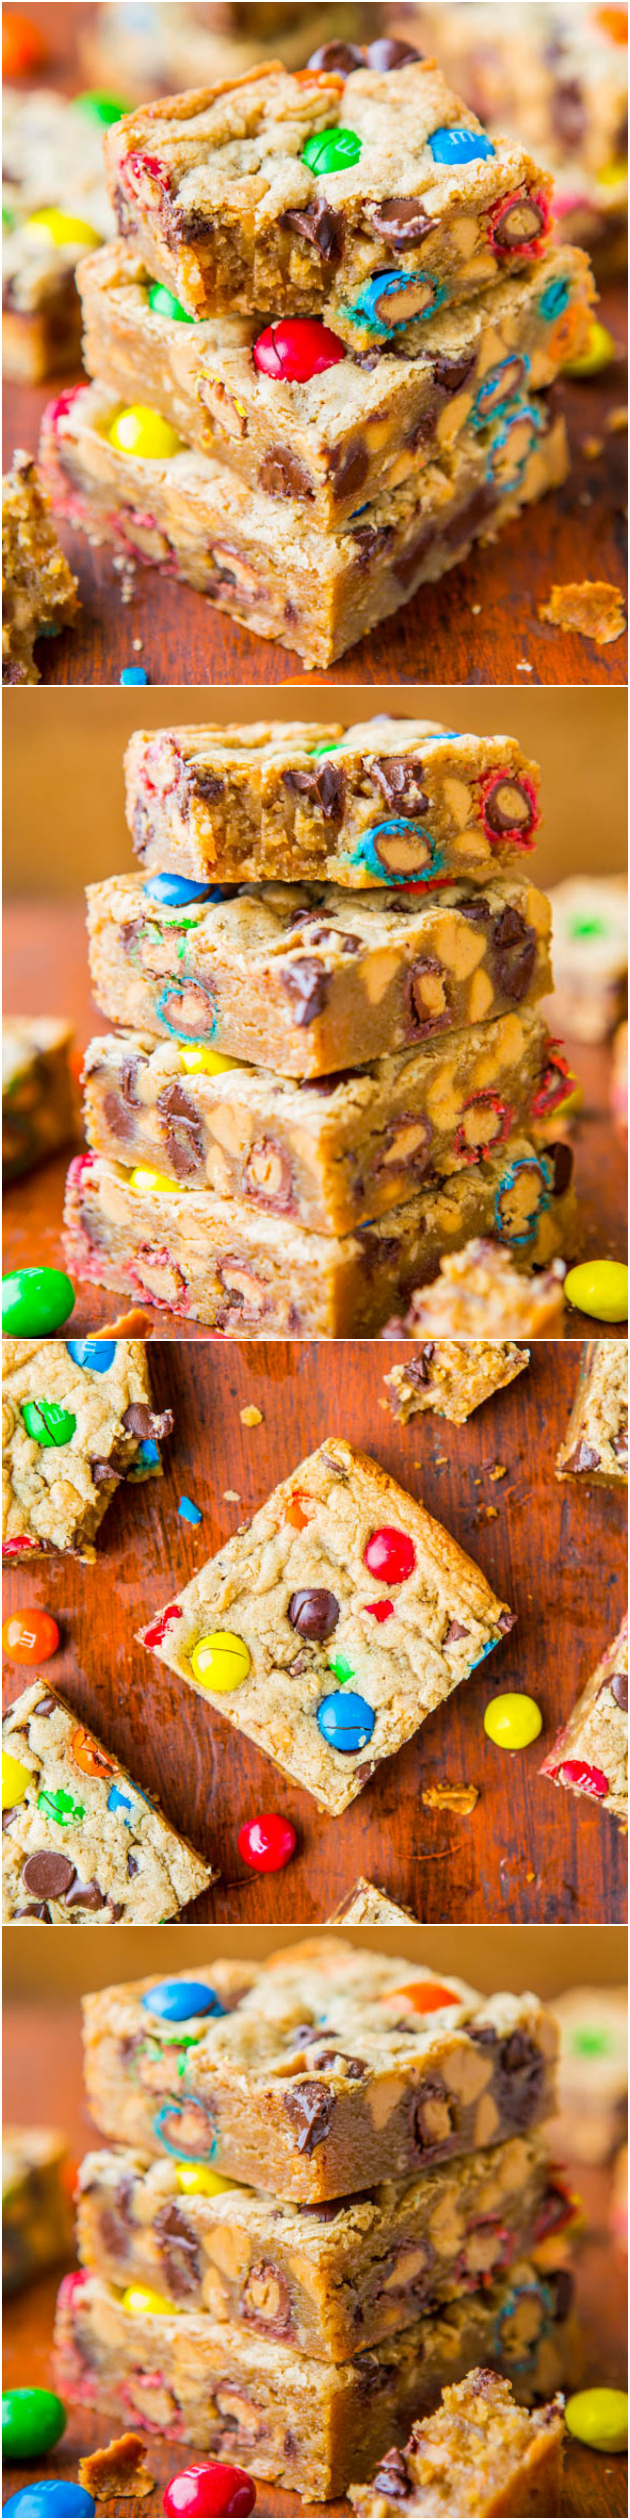 Triple Peanut Butter Monster Cookie Bars - Soft, gooey bars loaded with M&Ms, chocolate and made for serious peanut butter lovers! So good!